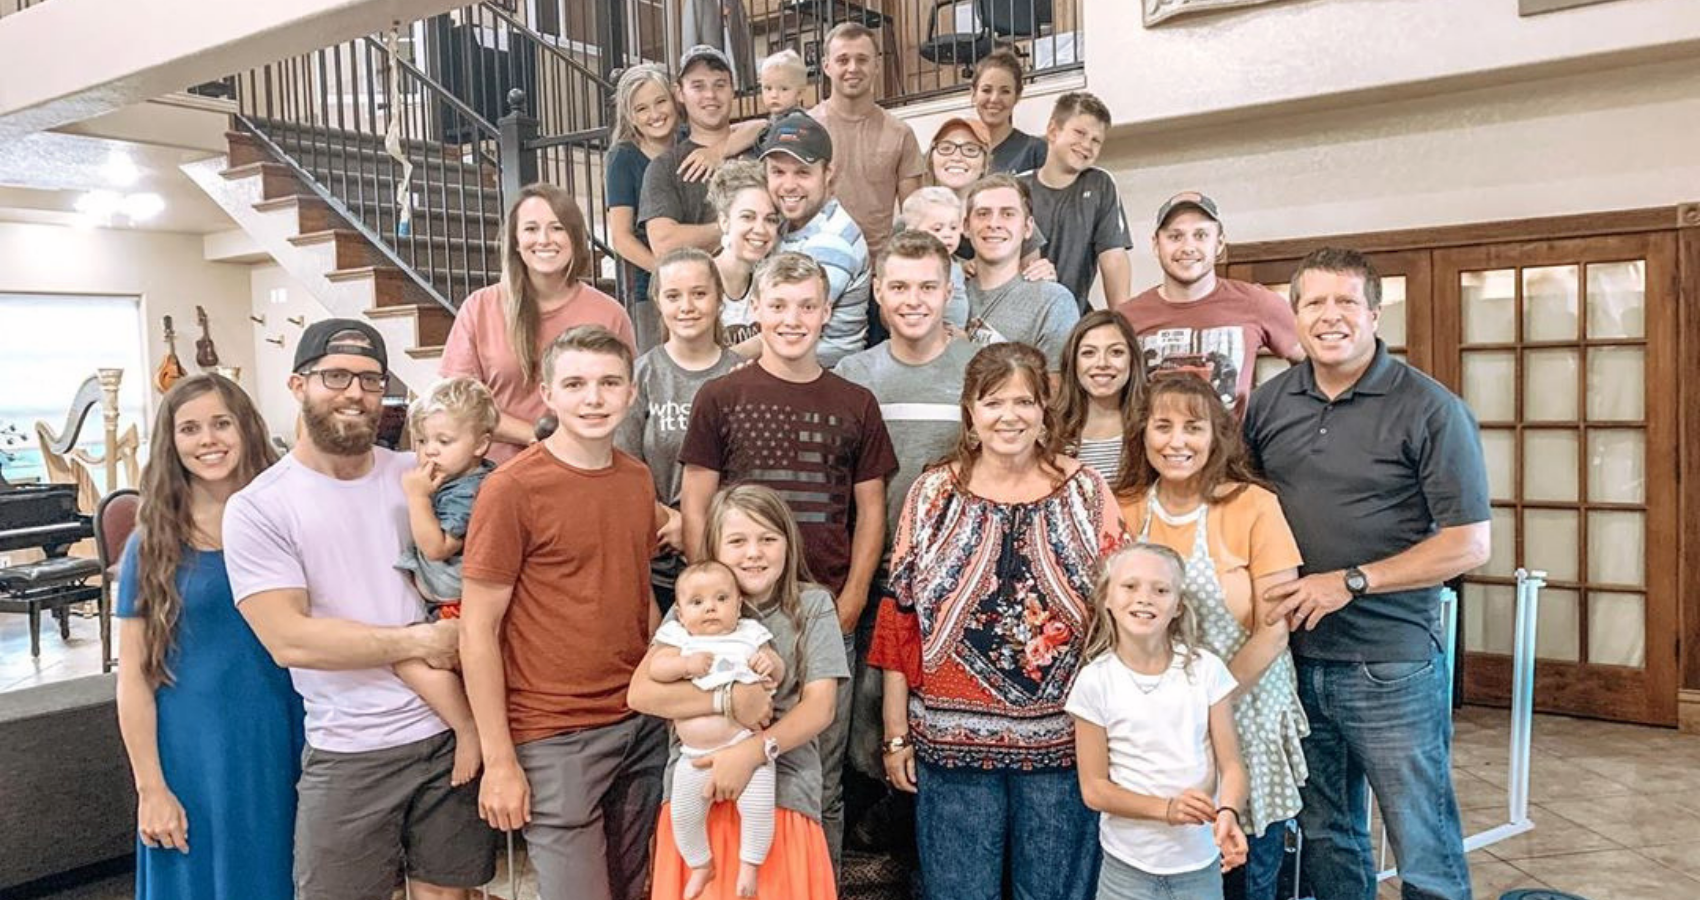 Duggar Women Share Pregnancy Photo With All 5 Who Are Expecting